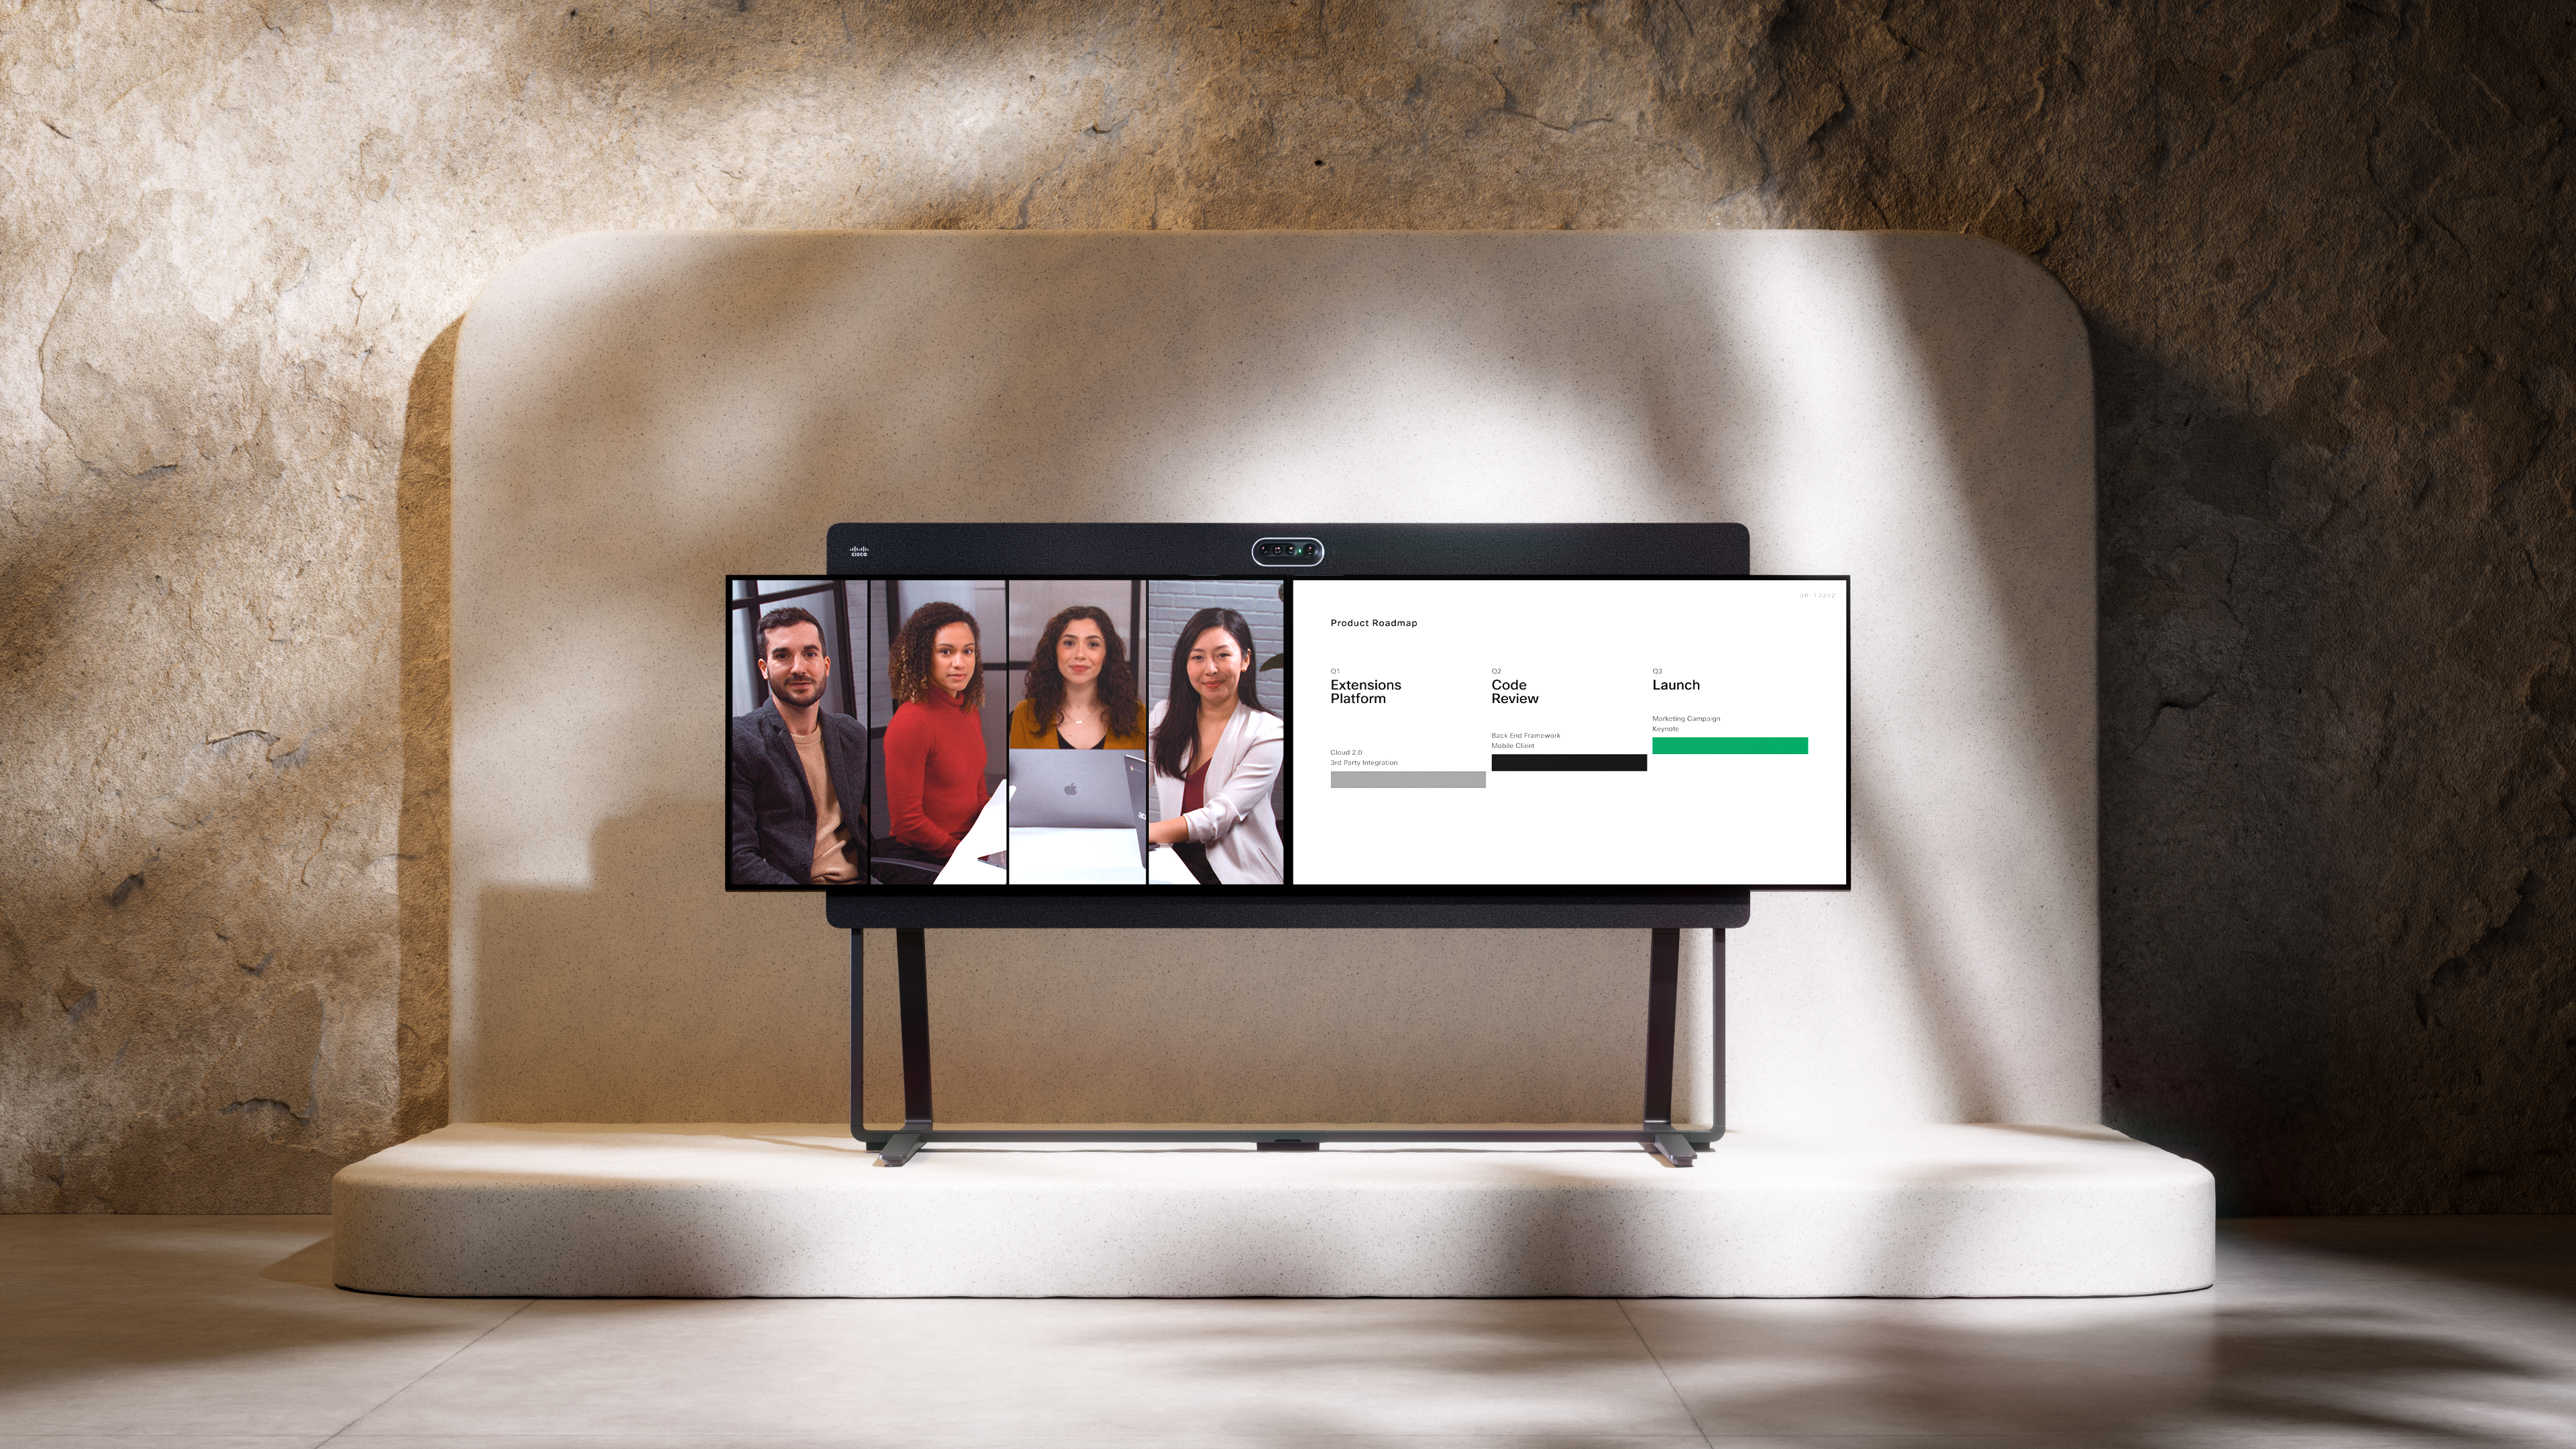 The Room Kit EQX is a new, integrated collaboration solution that allows customers to deploy beautiful, future-of-meeting rooms simply and consistently across sites.  